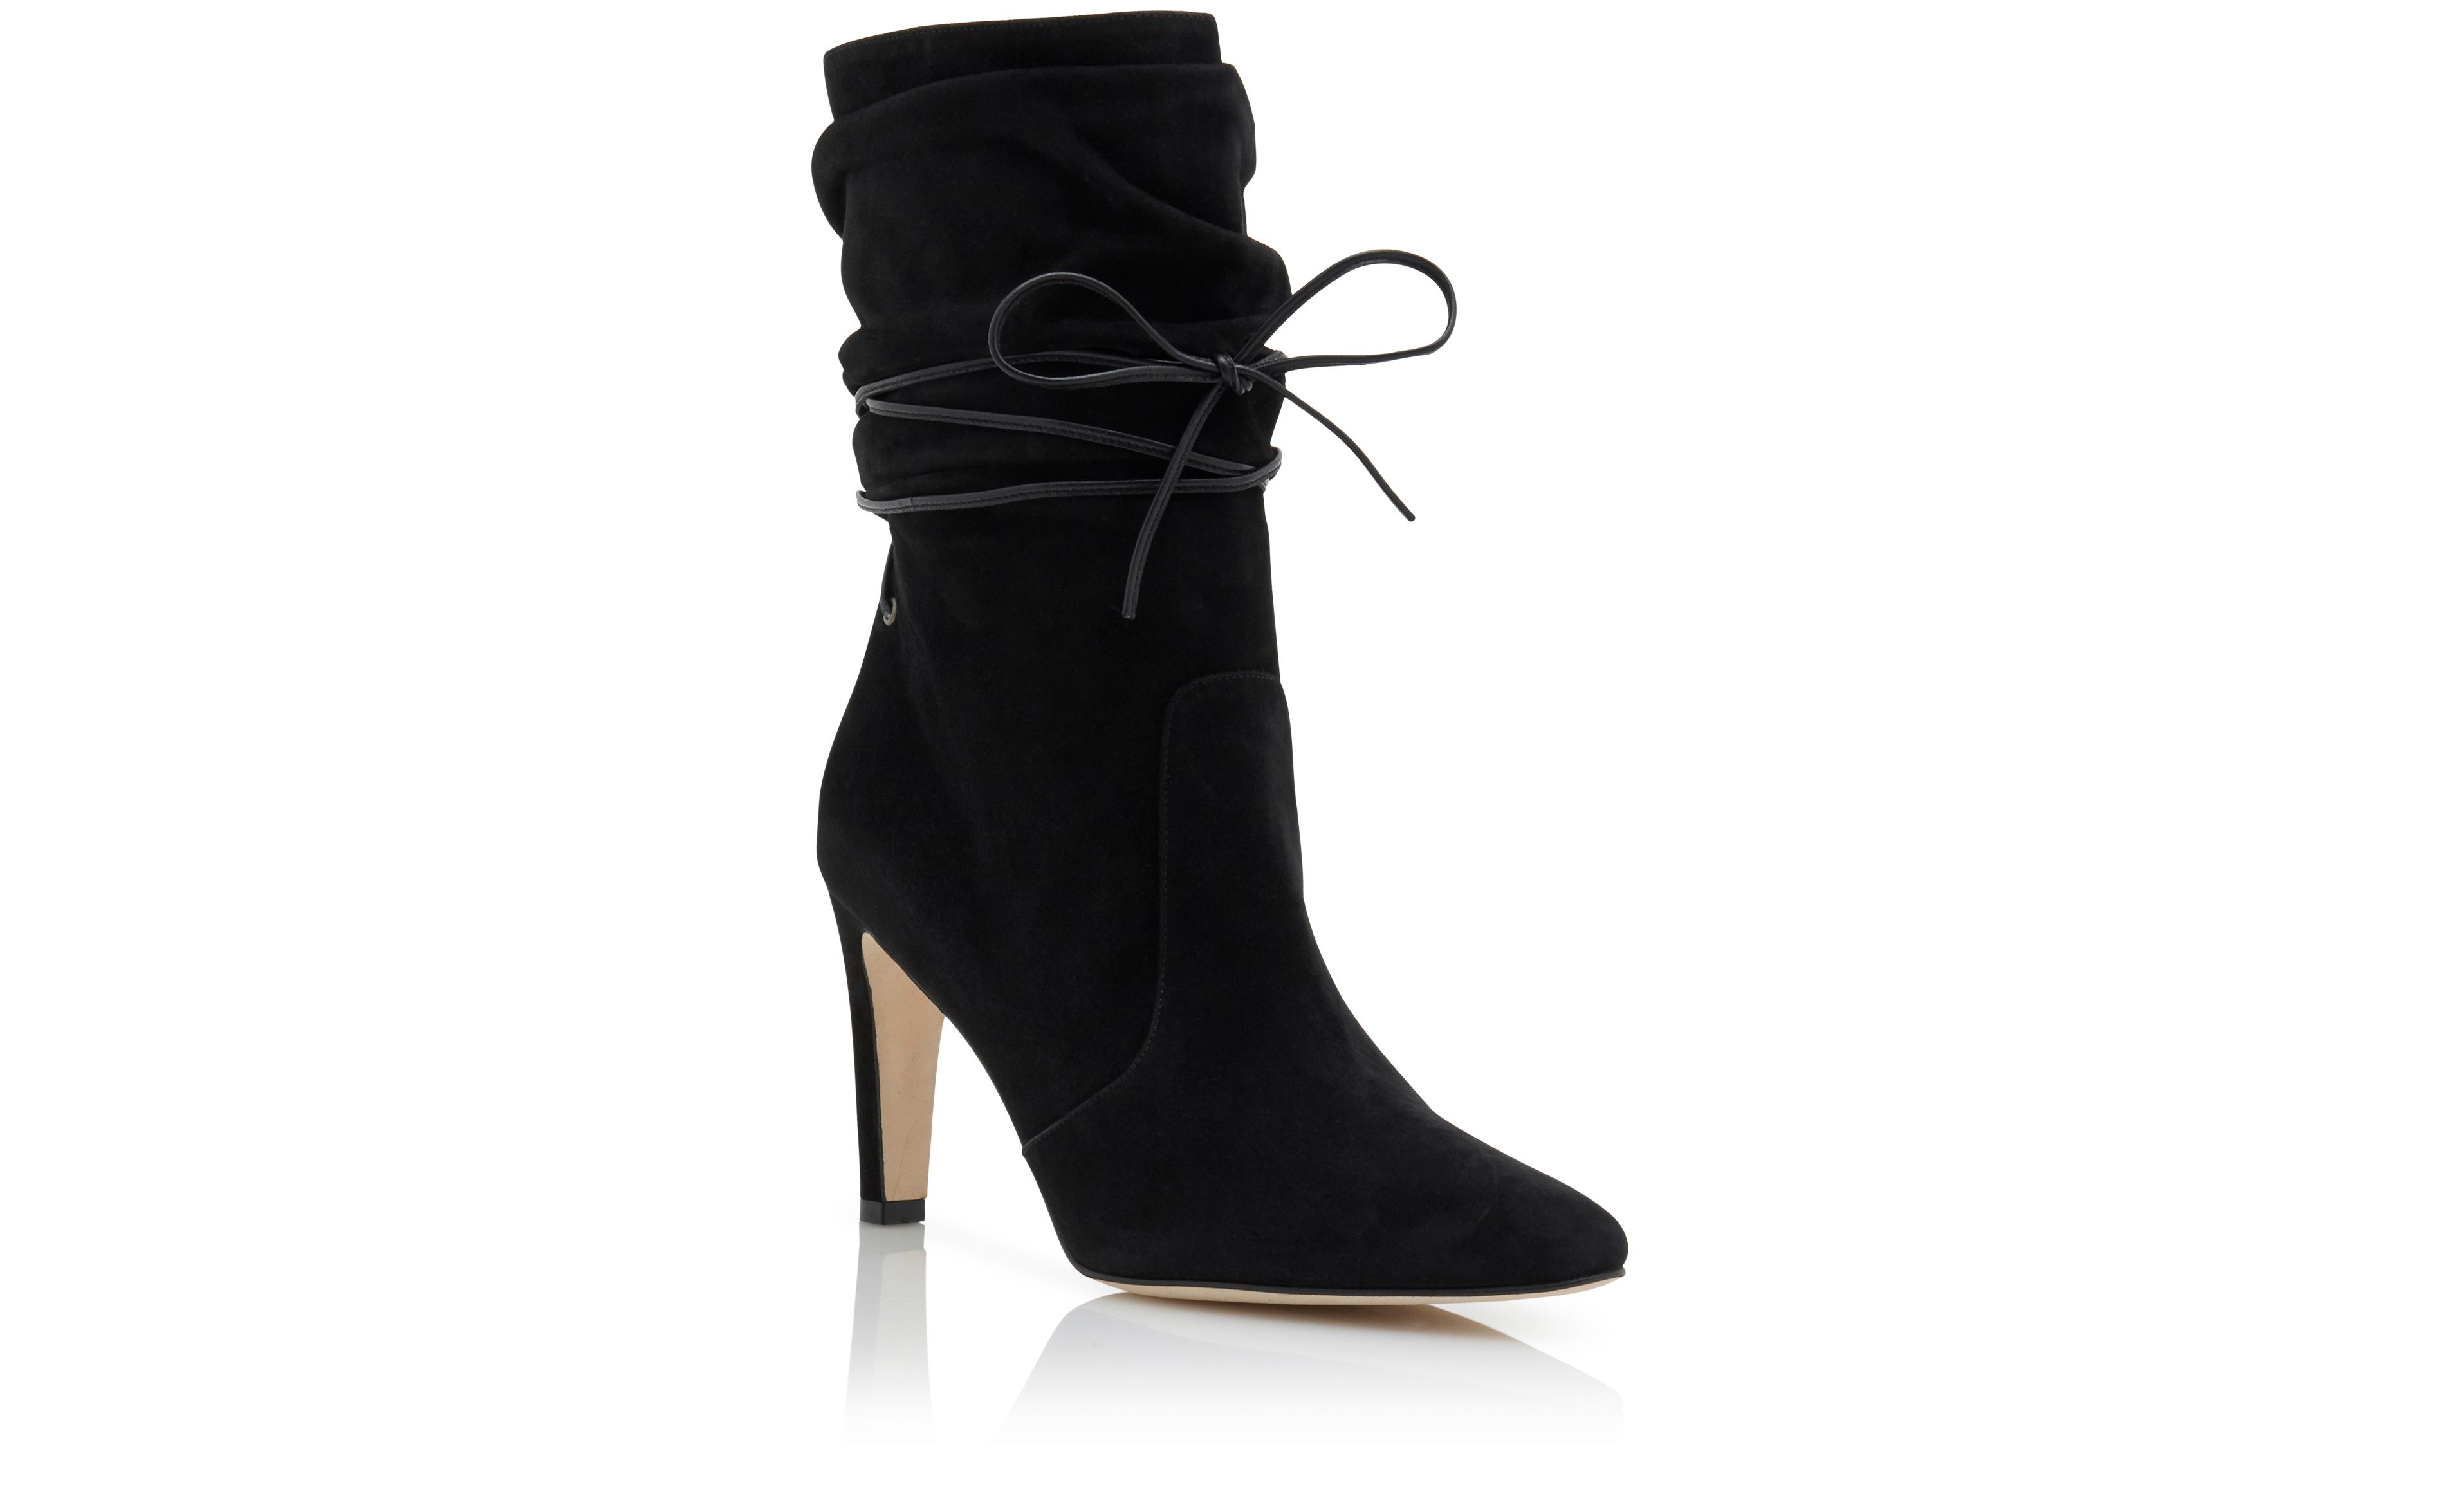 Designer Black Suede Slouchy Ankle Boots - Image Upsell